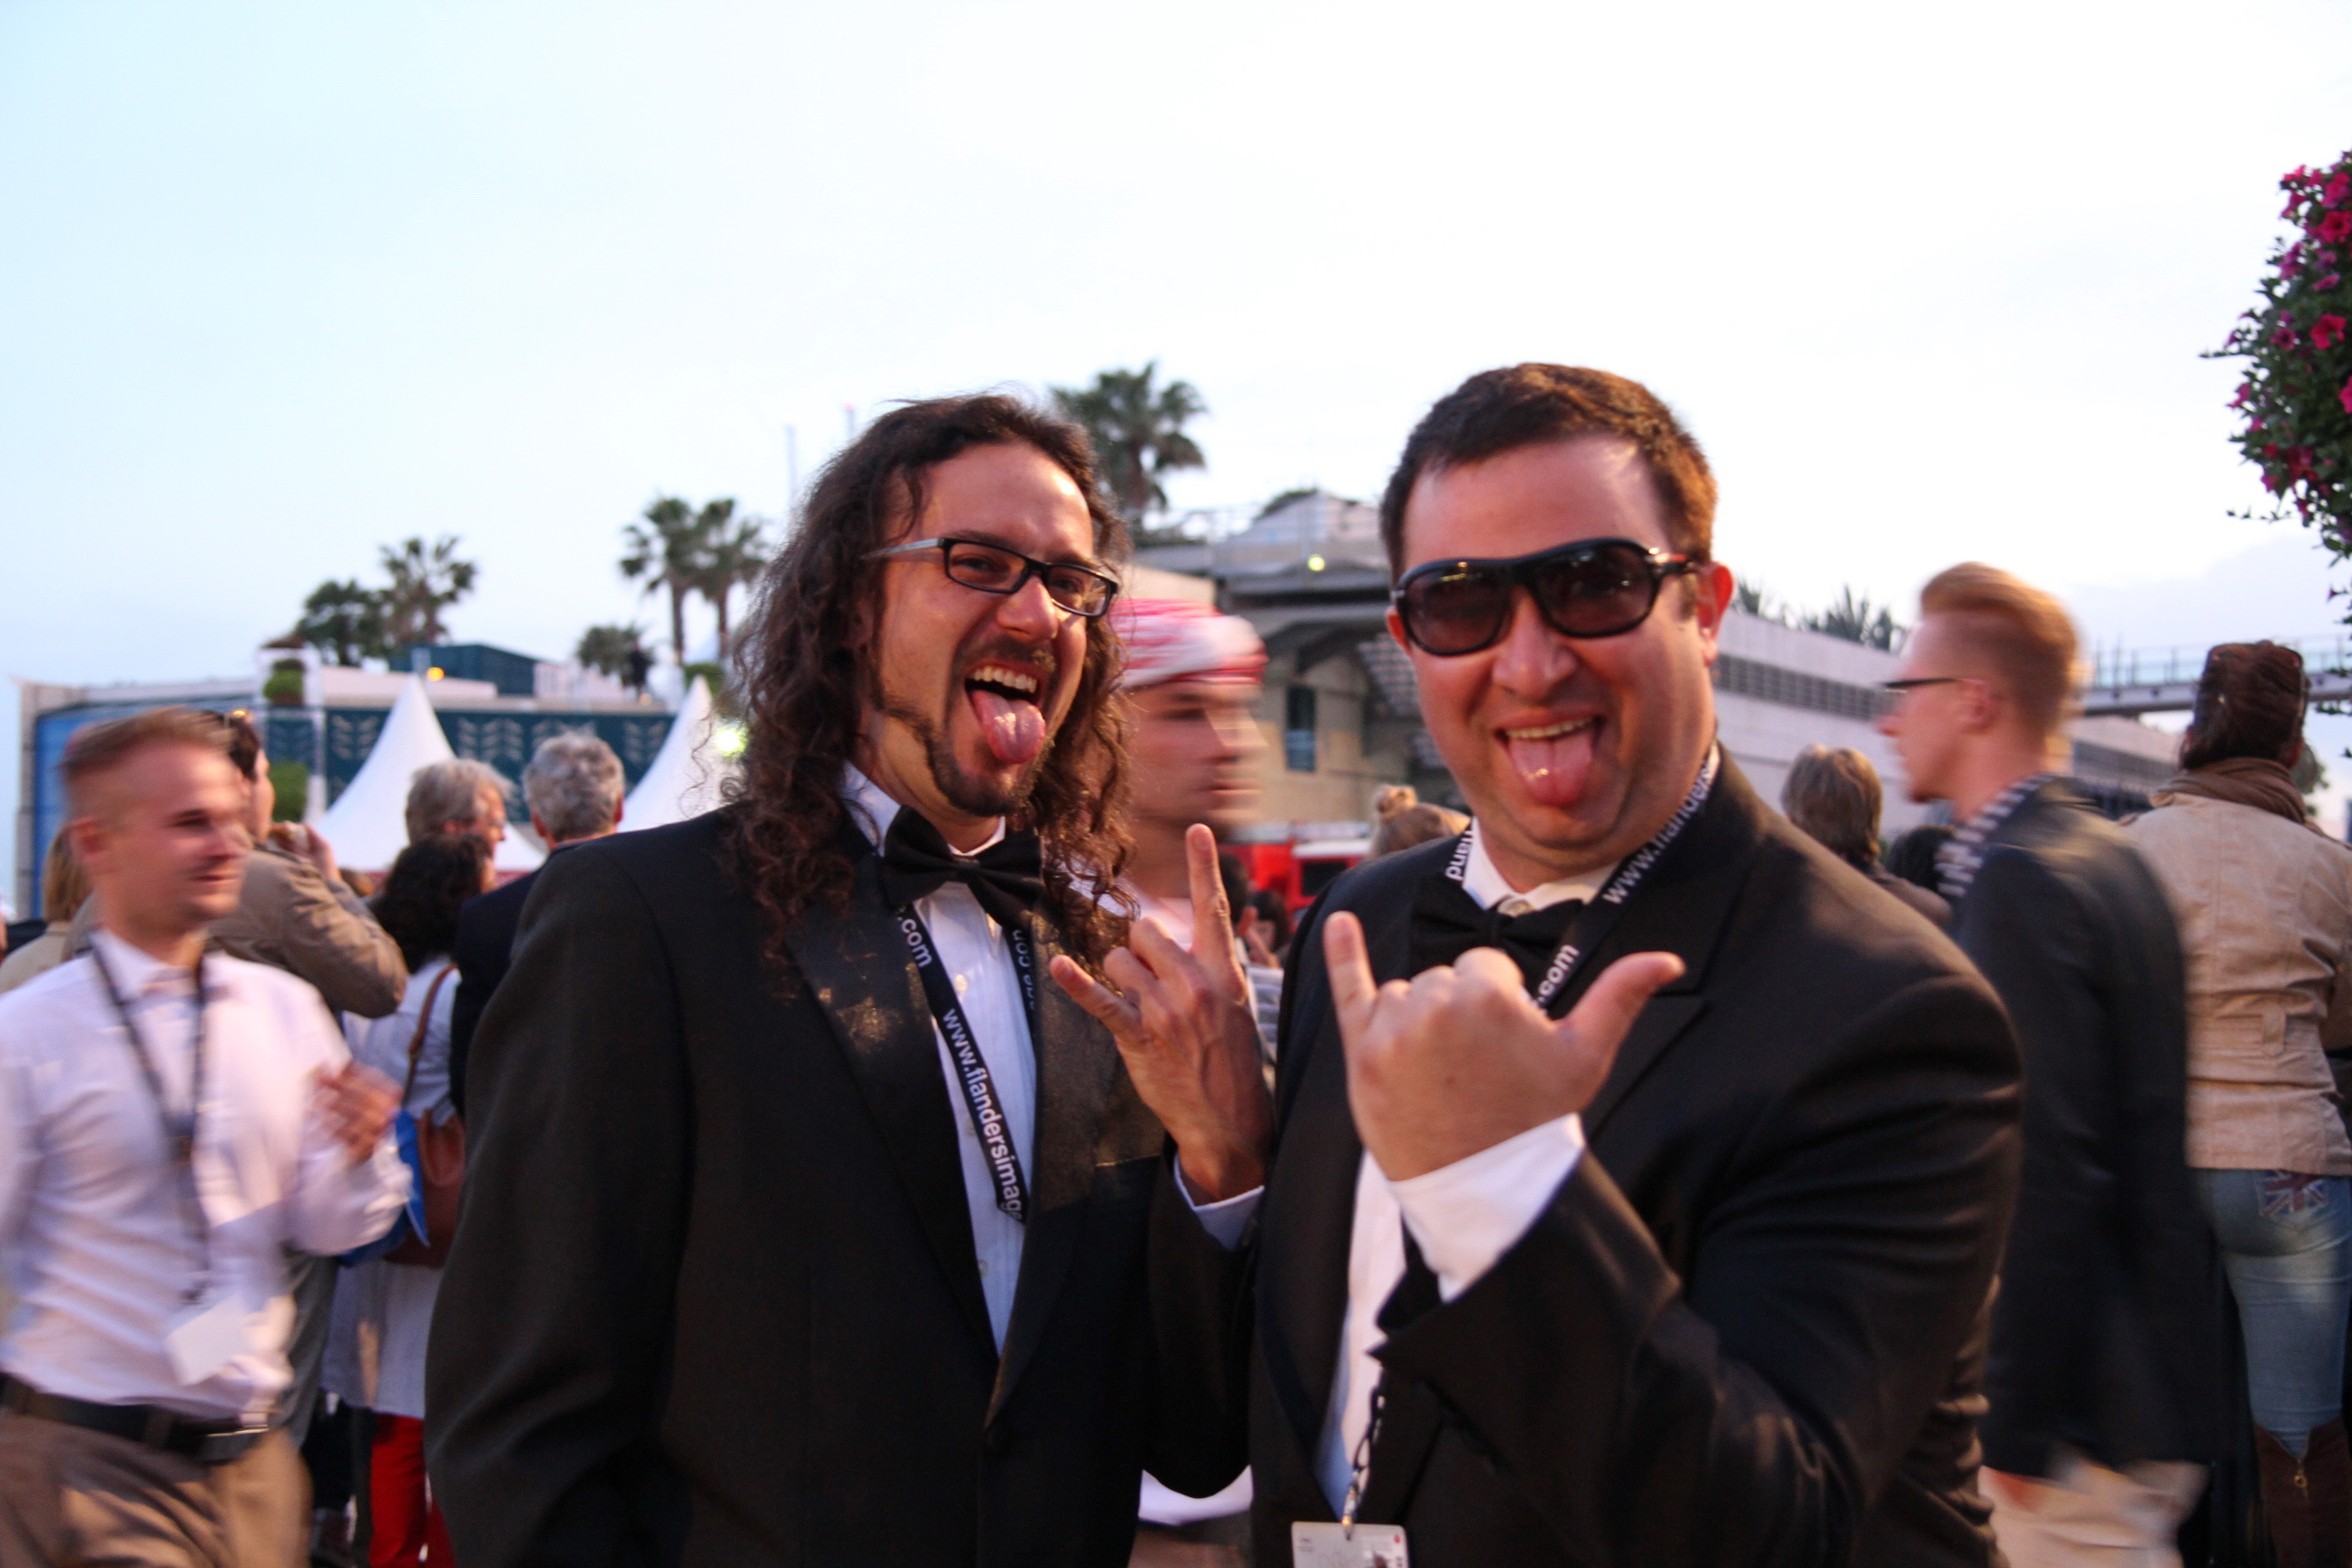 Jeremy Deneau and Dan Frank at Festival de Cannes - 2012 for premiere of Frank & Chip: The Olympic Experience.